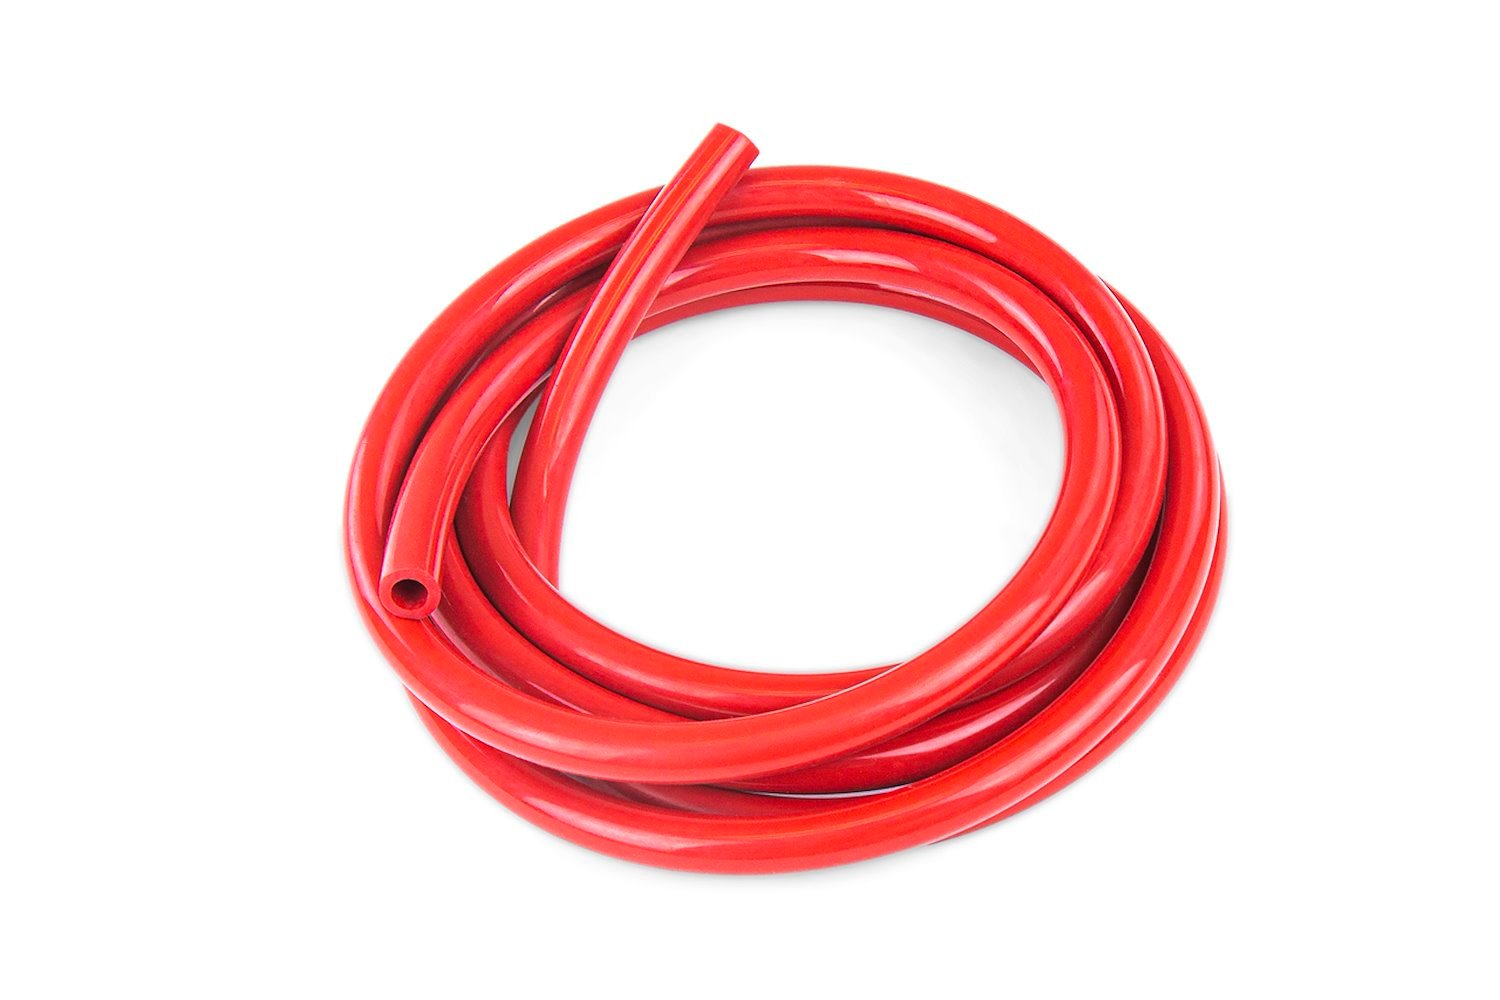 HTSVH3-REDx25 High-Temperature Silicone Vacuum Hose Tubing, 1/8 in. ID, 25 ft. Roll, Red